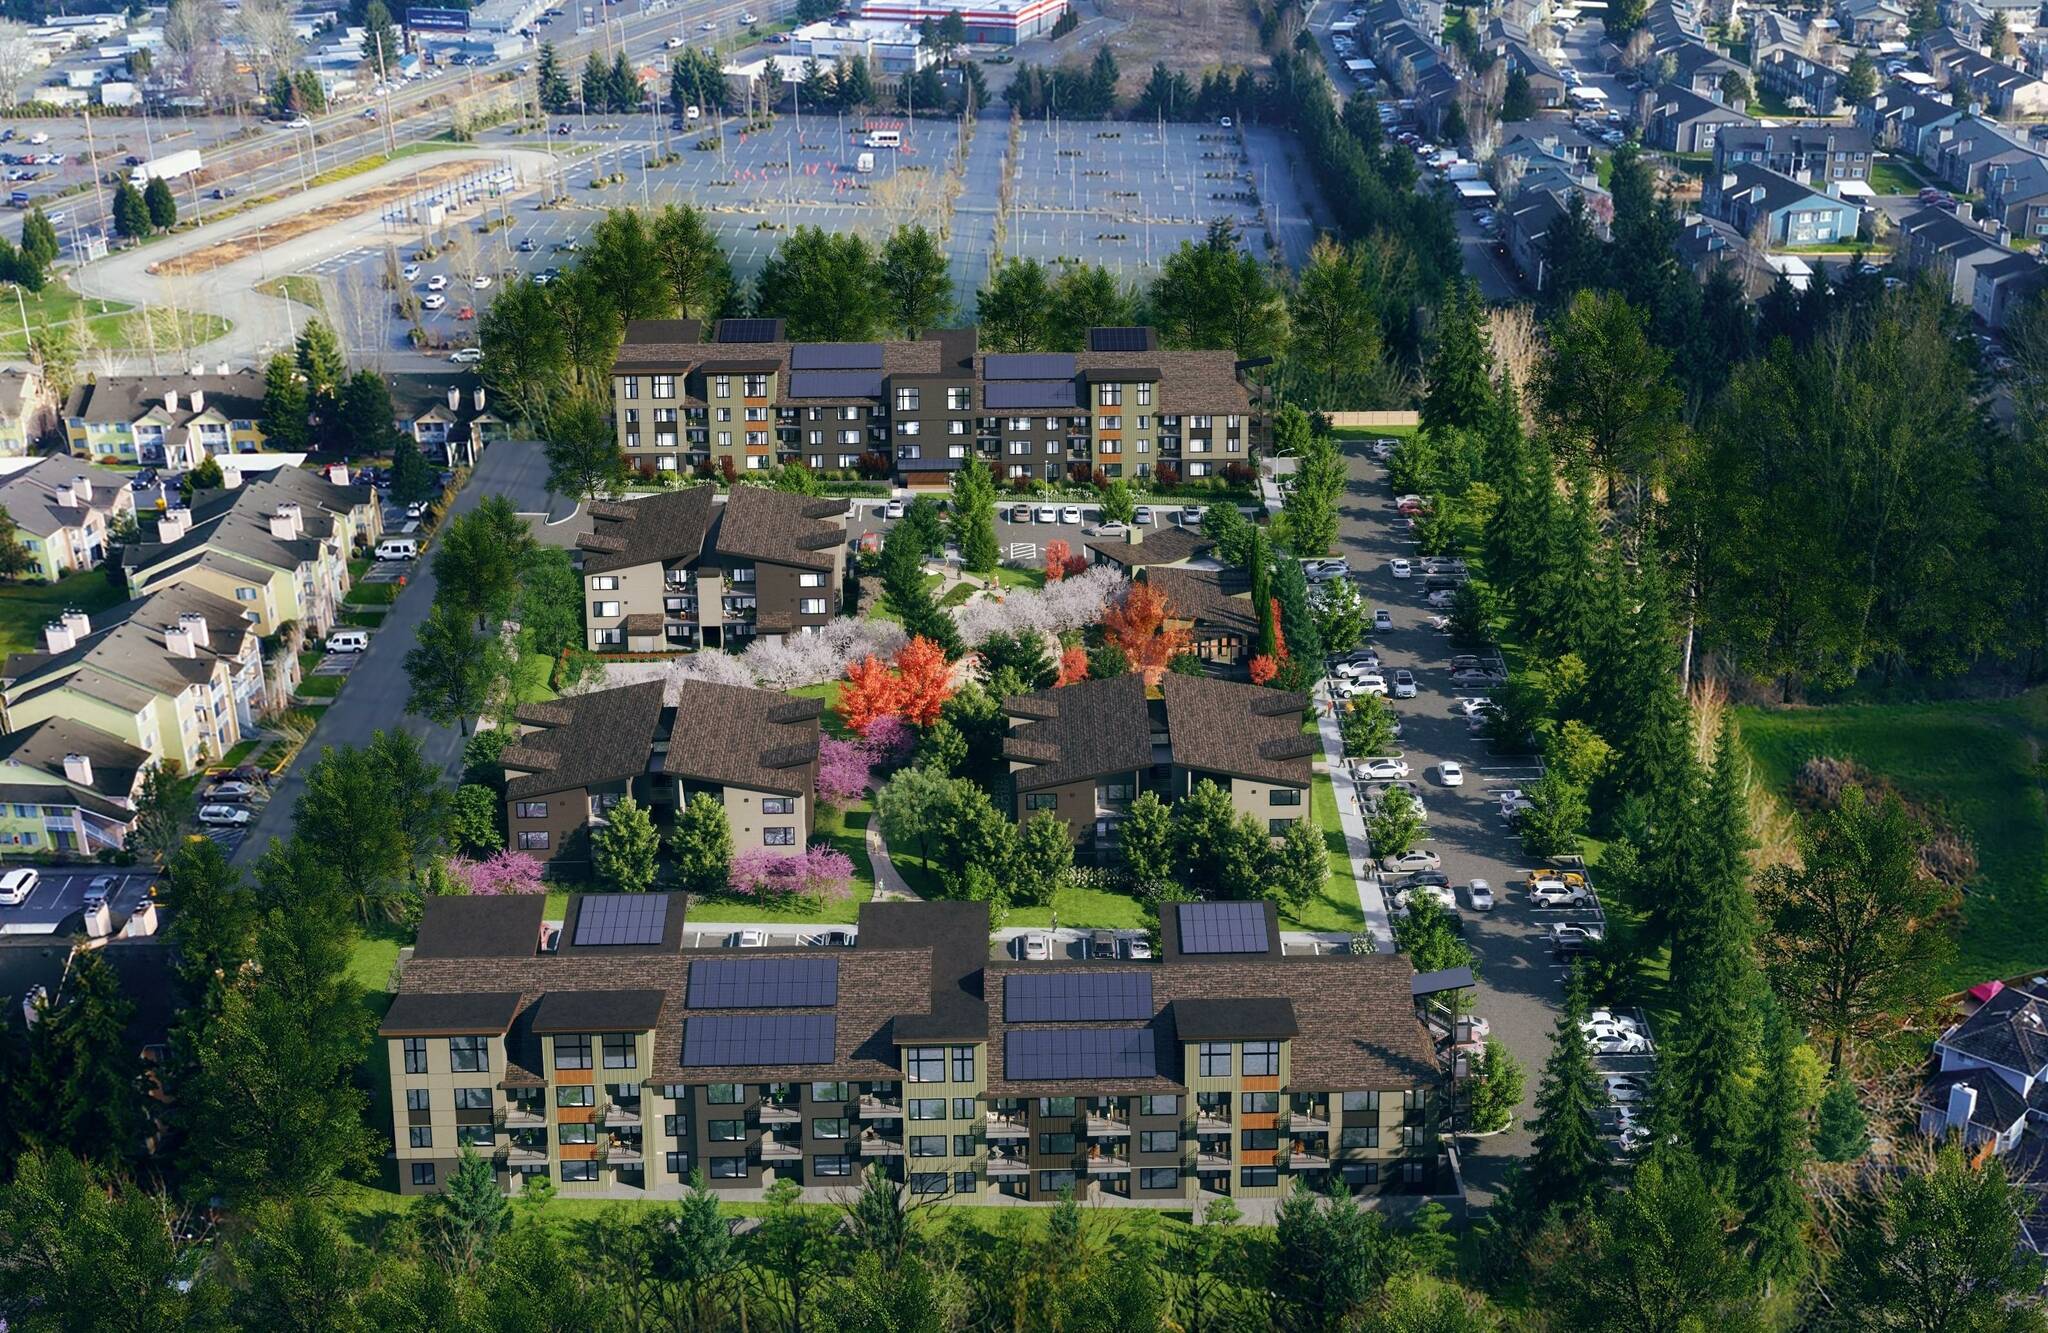 This architectural rendering by Bumgardner Architects shows the development from a bird’s eye view, with the Redondo Heights Park & Ride immediately to the north and Pacific Highway to the west.